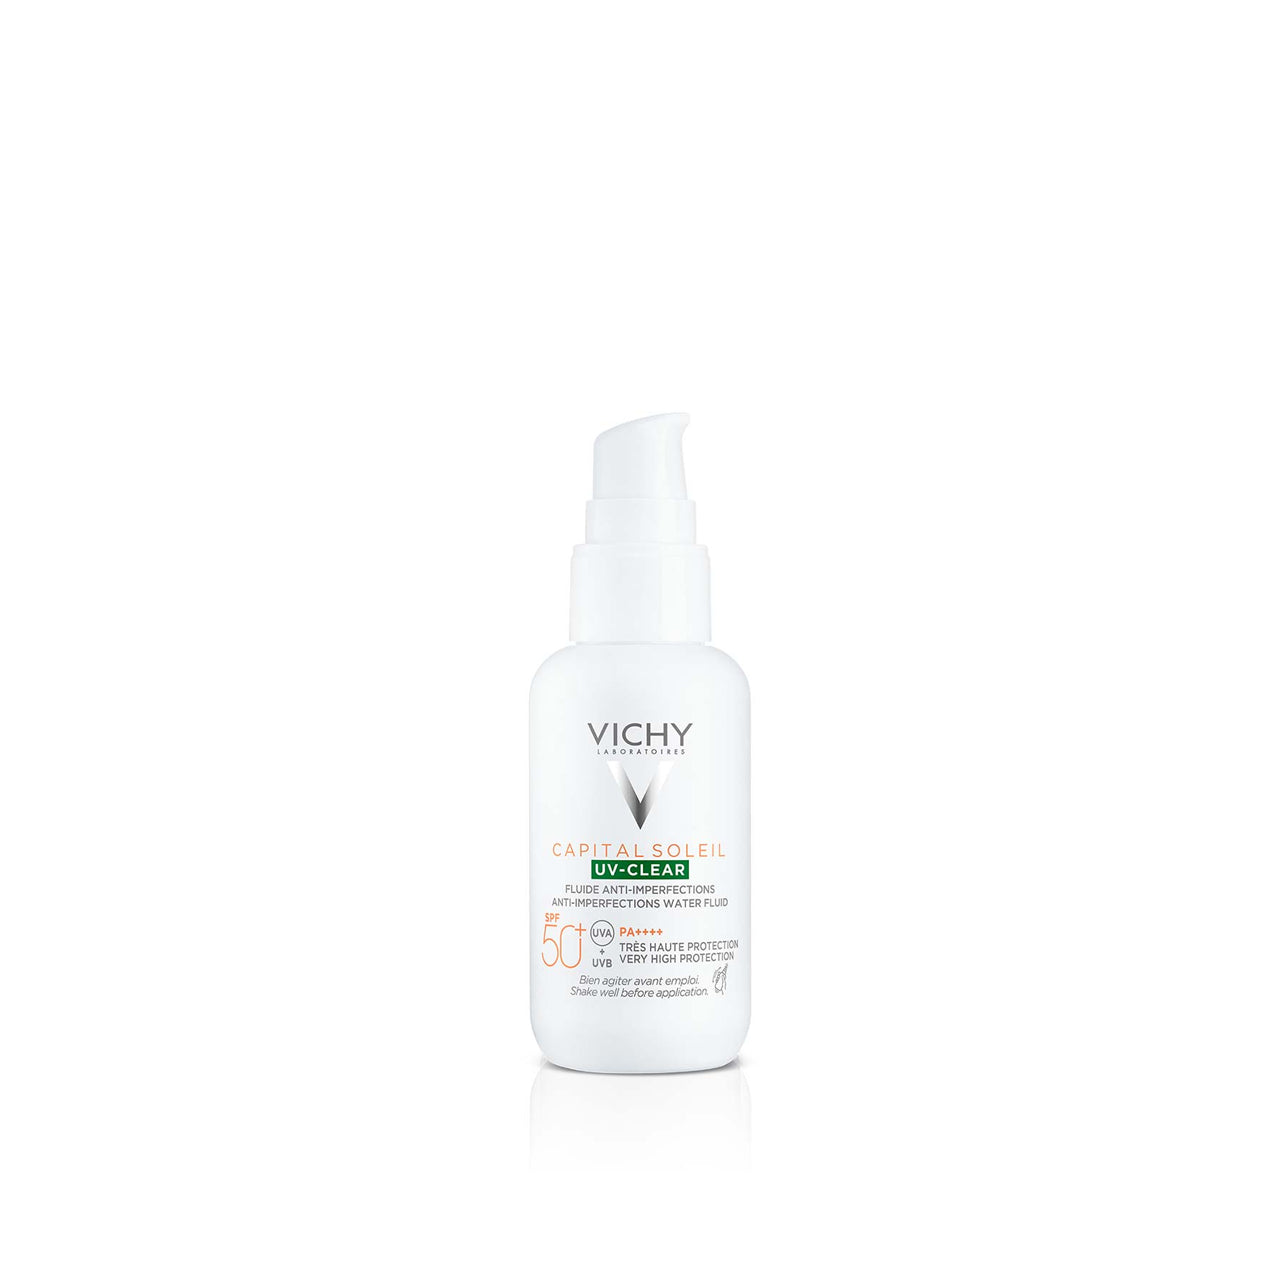 Vichy Capital Soleil UV Clear Fluide Anti-Imperfections SPF50+ 40 Ml